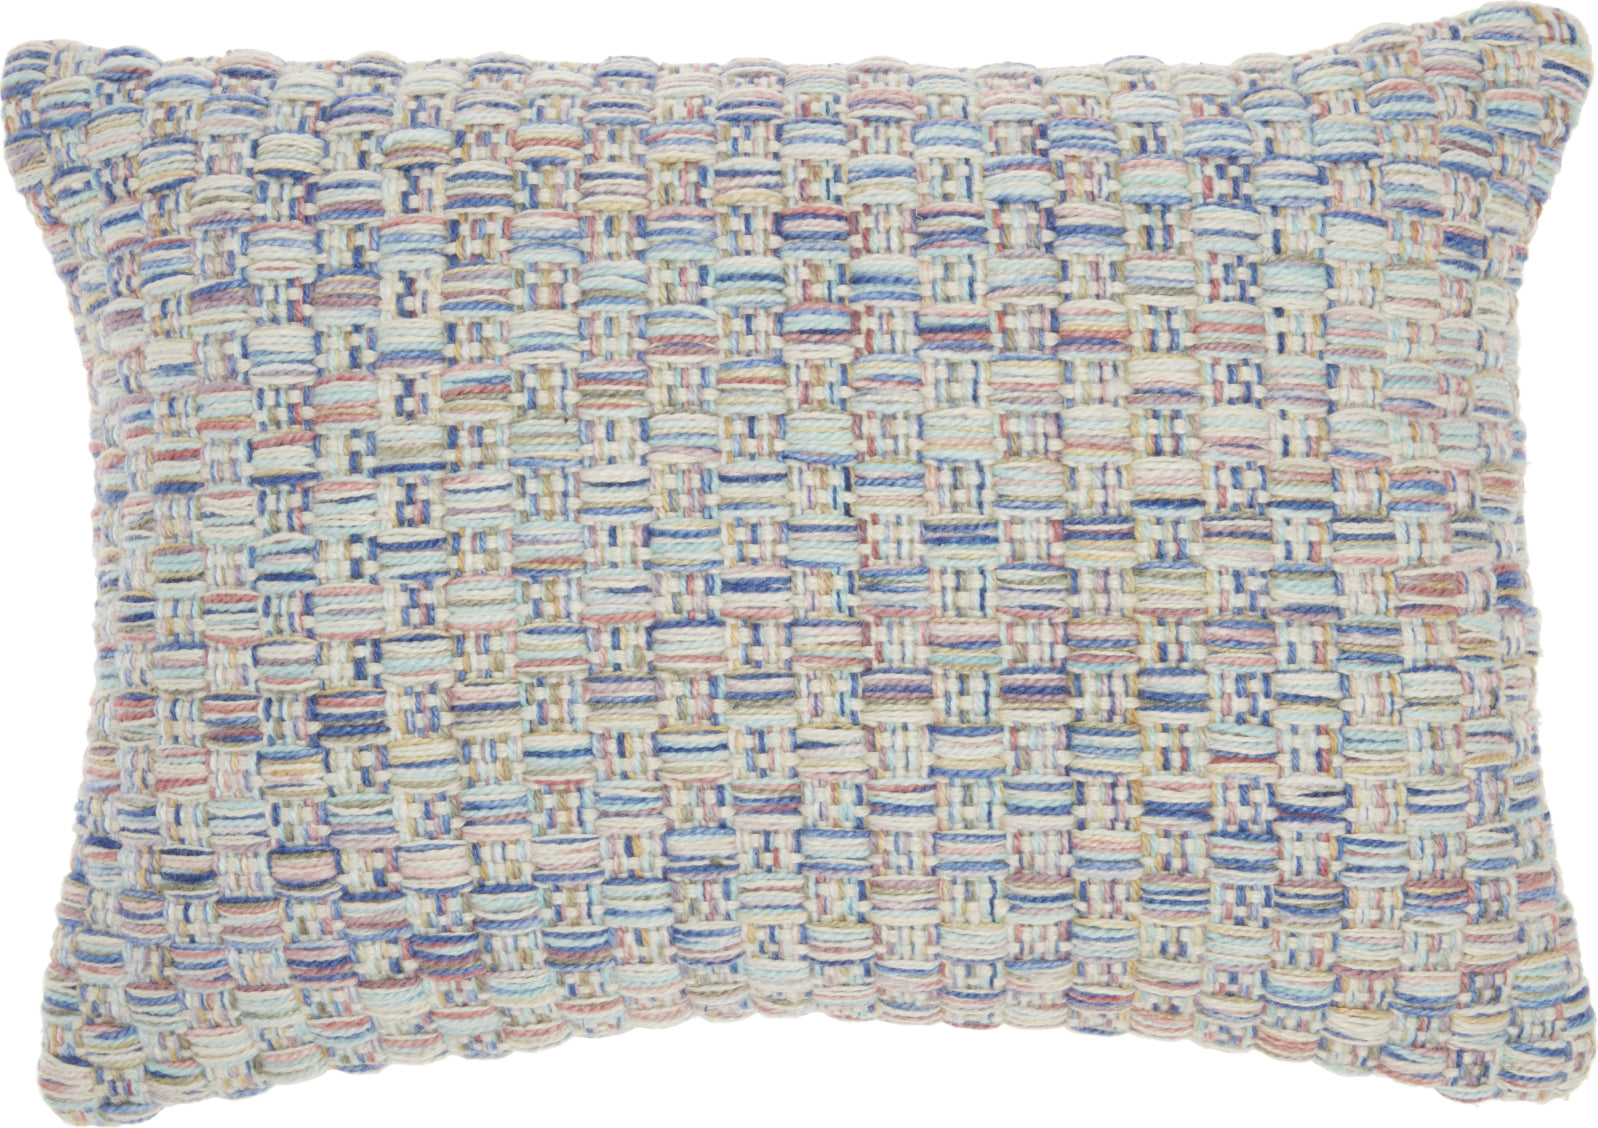 Nourison Outdoor Pillows Woven Basketweave Multicolor by Mina Victory main image